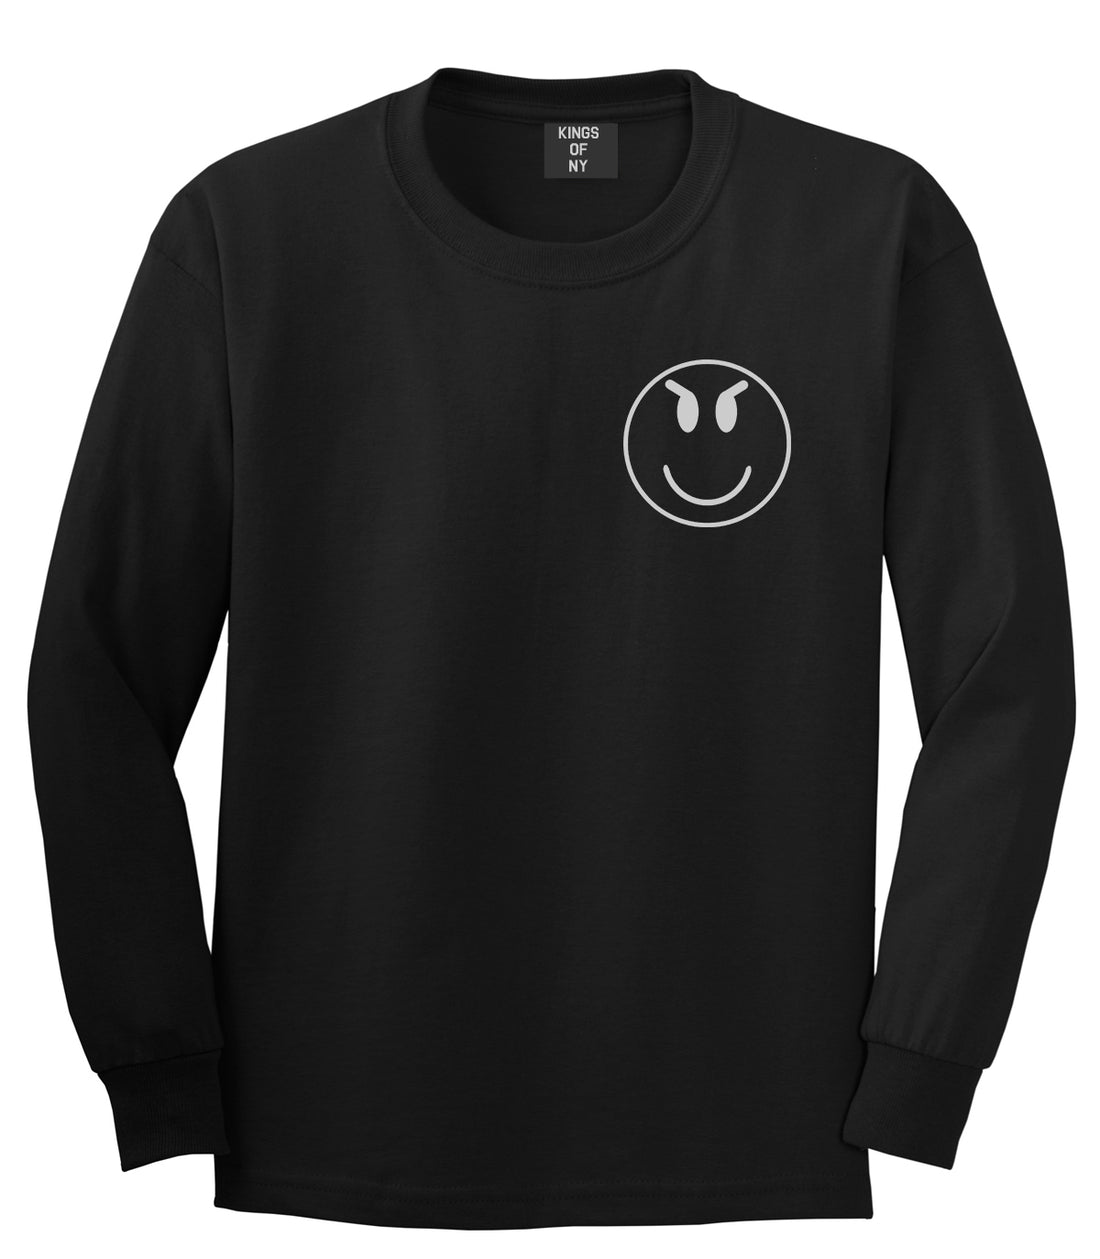 Evil Face Emoji Chest Mens Black Long Sleeve T-Shirt by KINGS OF NY